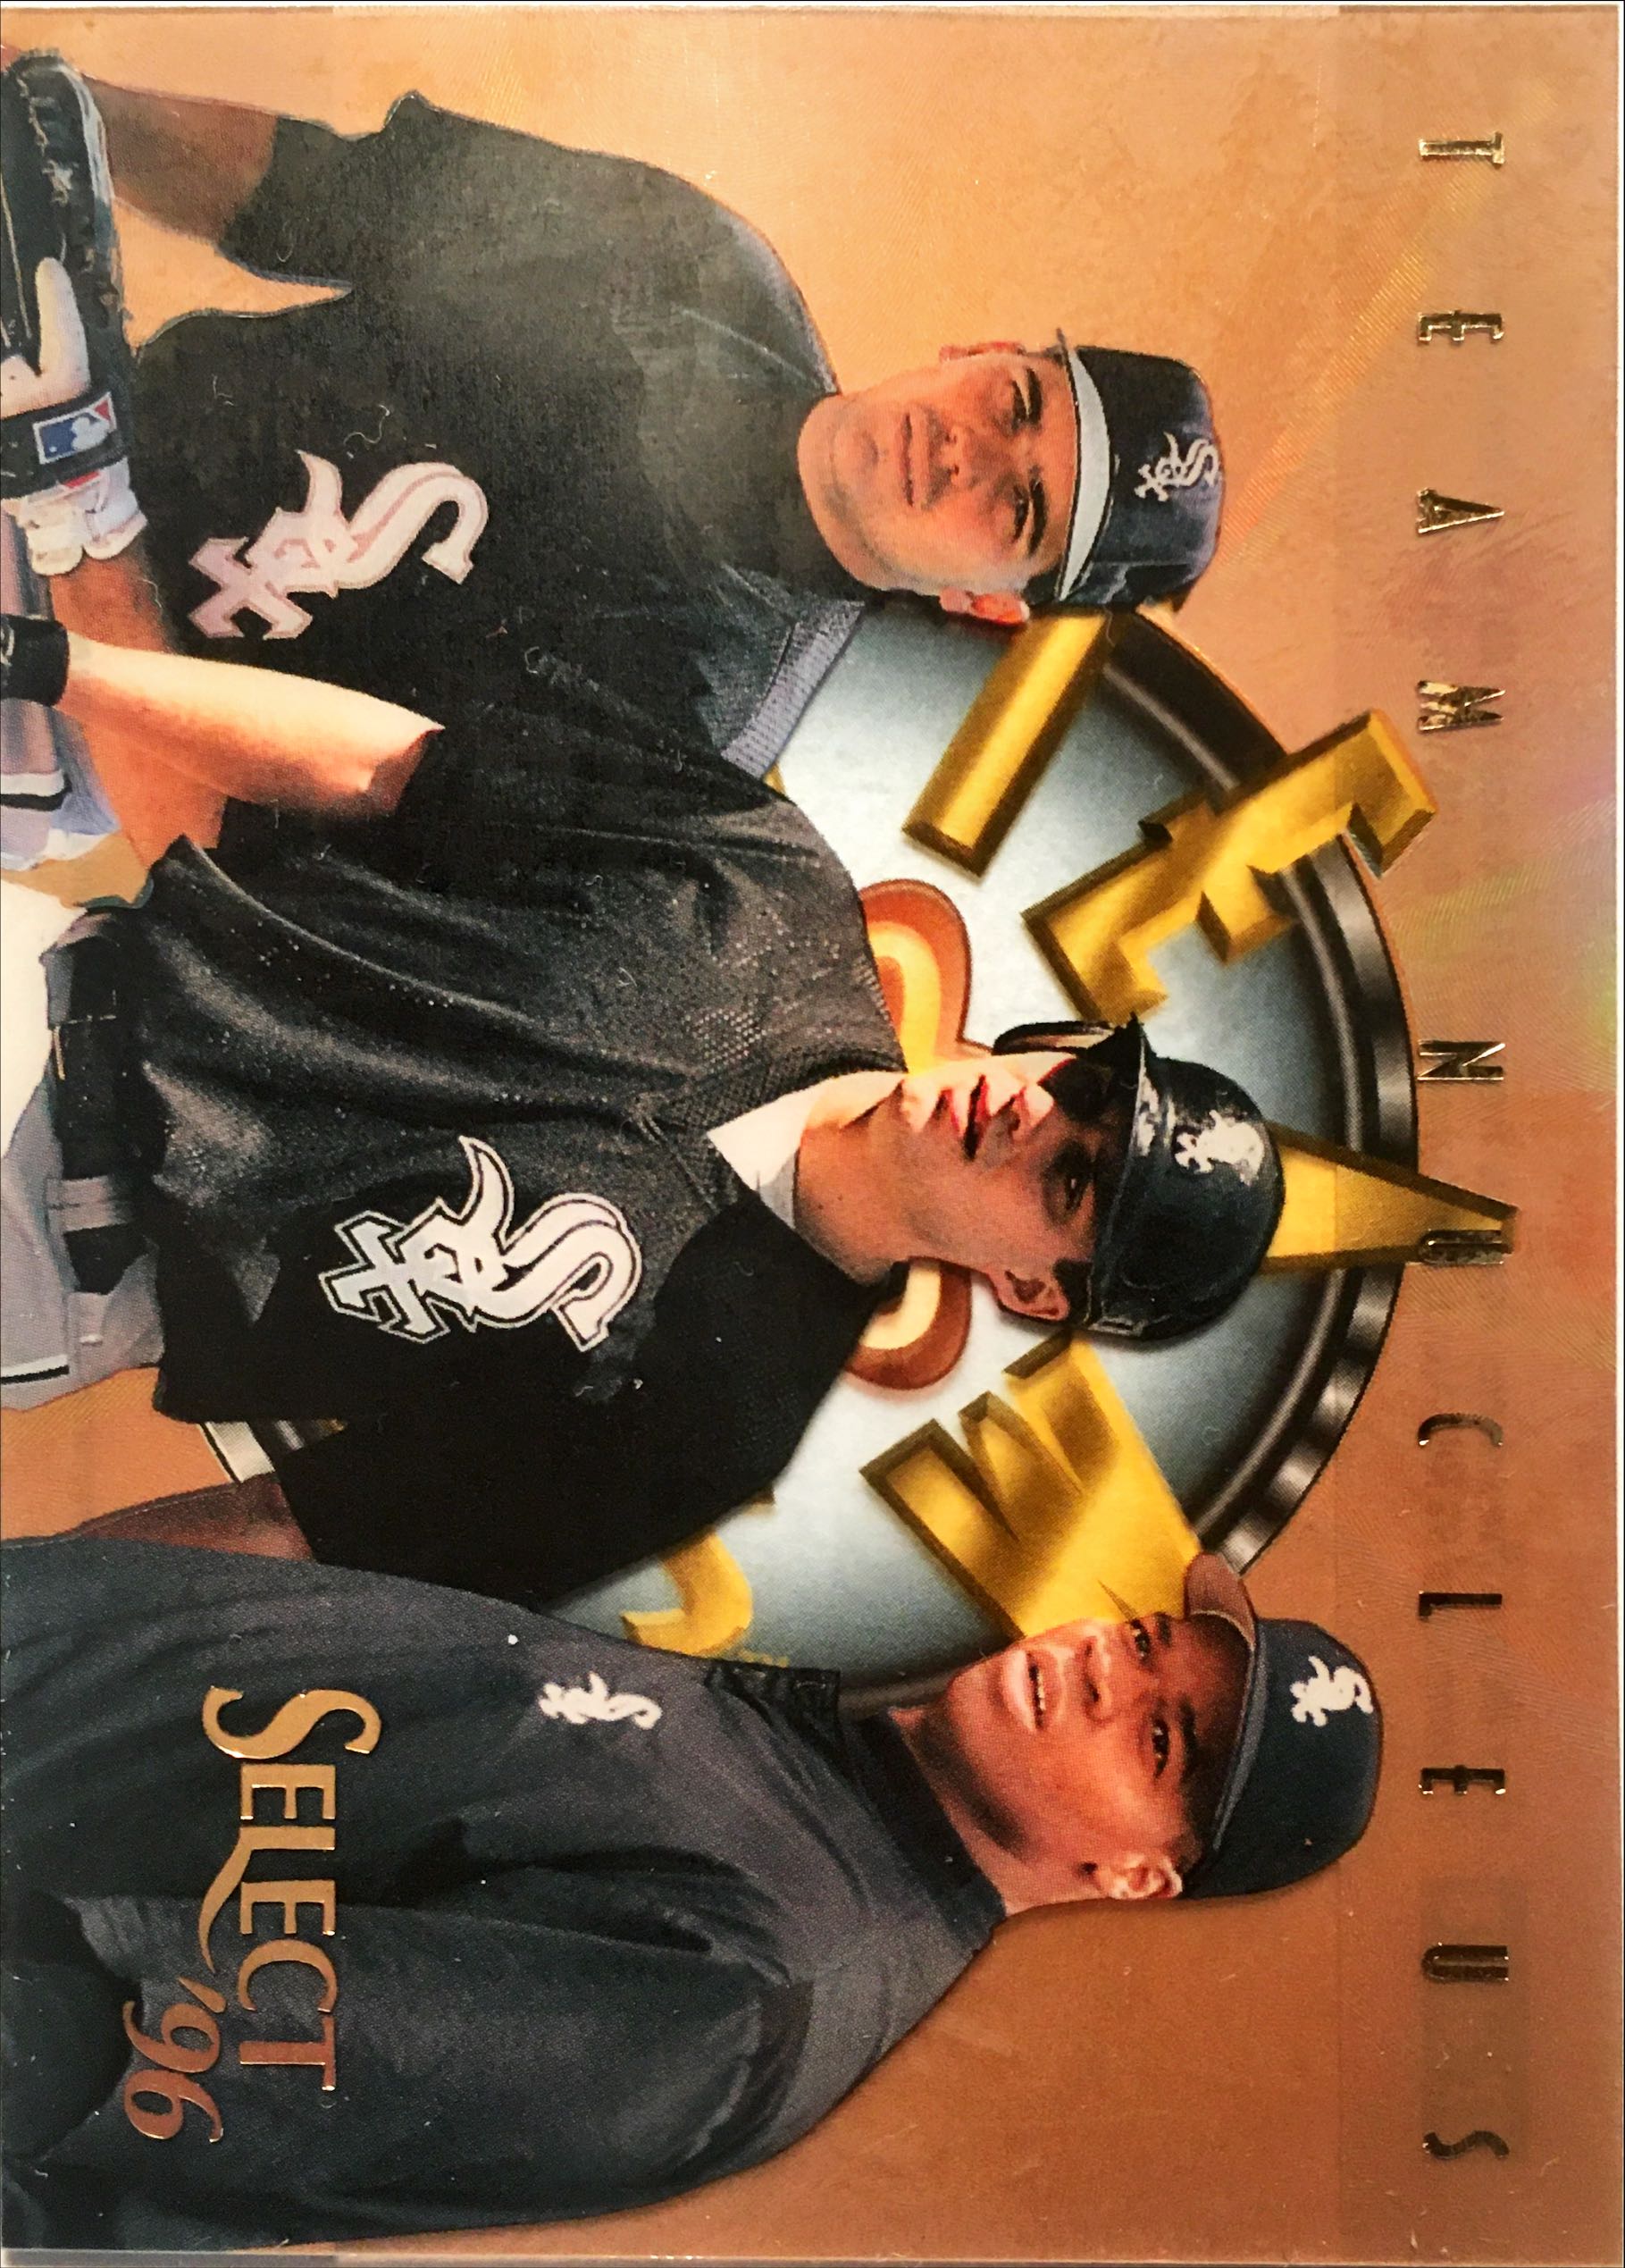 1996 Select Team Nucleus 27 front image